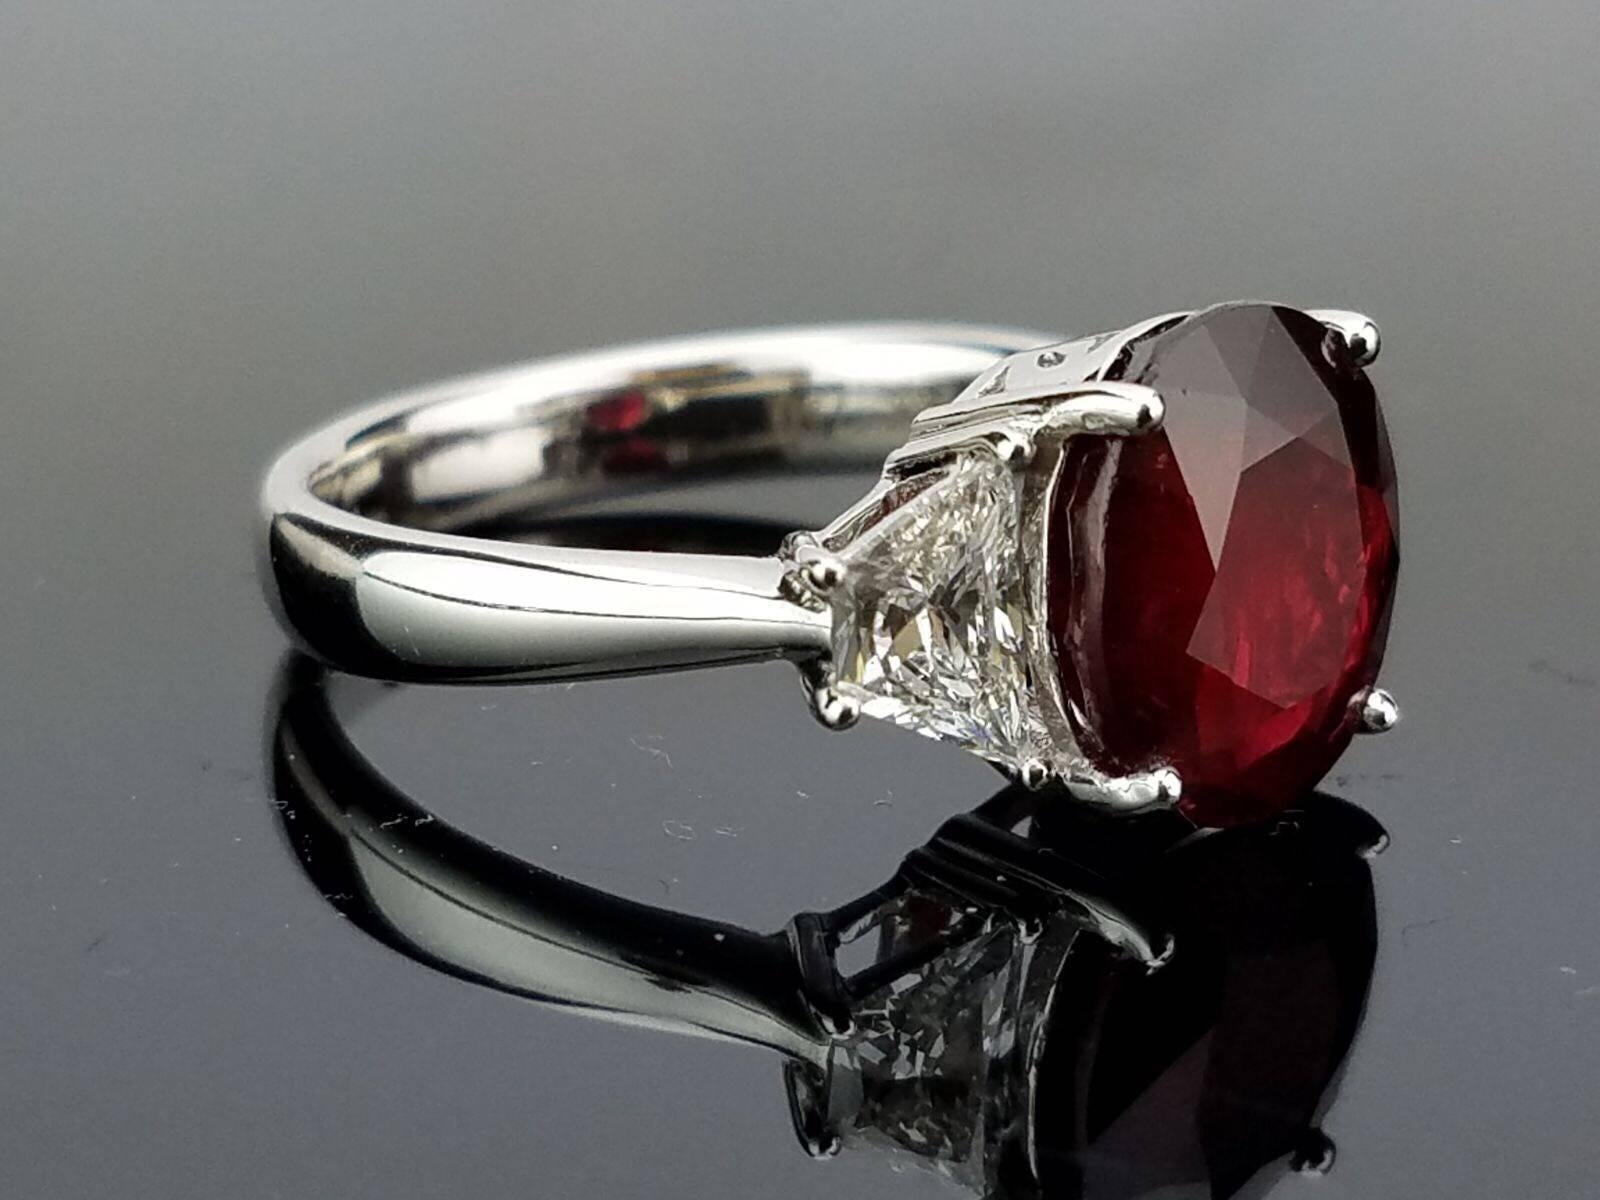 Beautiful, No Heat Mozambique Ruby (very few inclusions) Ring with 2 Trapeze Diamond Side Stone, set in 18K Gold.

Stone Details: 
Stone: No Heat Mozambique Ruby
Cut: Oval
Carat Weight: 4.05

Diamond Details:
Cut: Trapeze
Total Carat Weight: